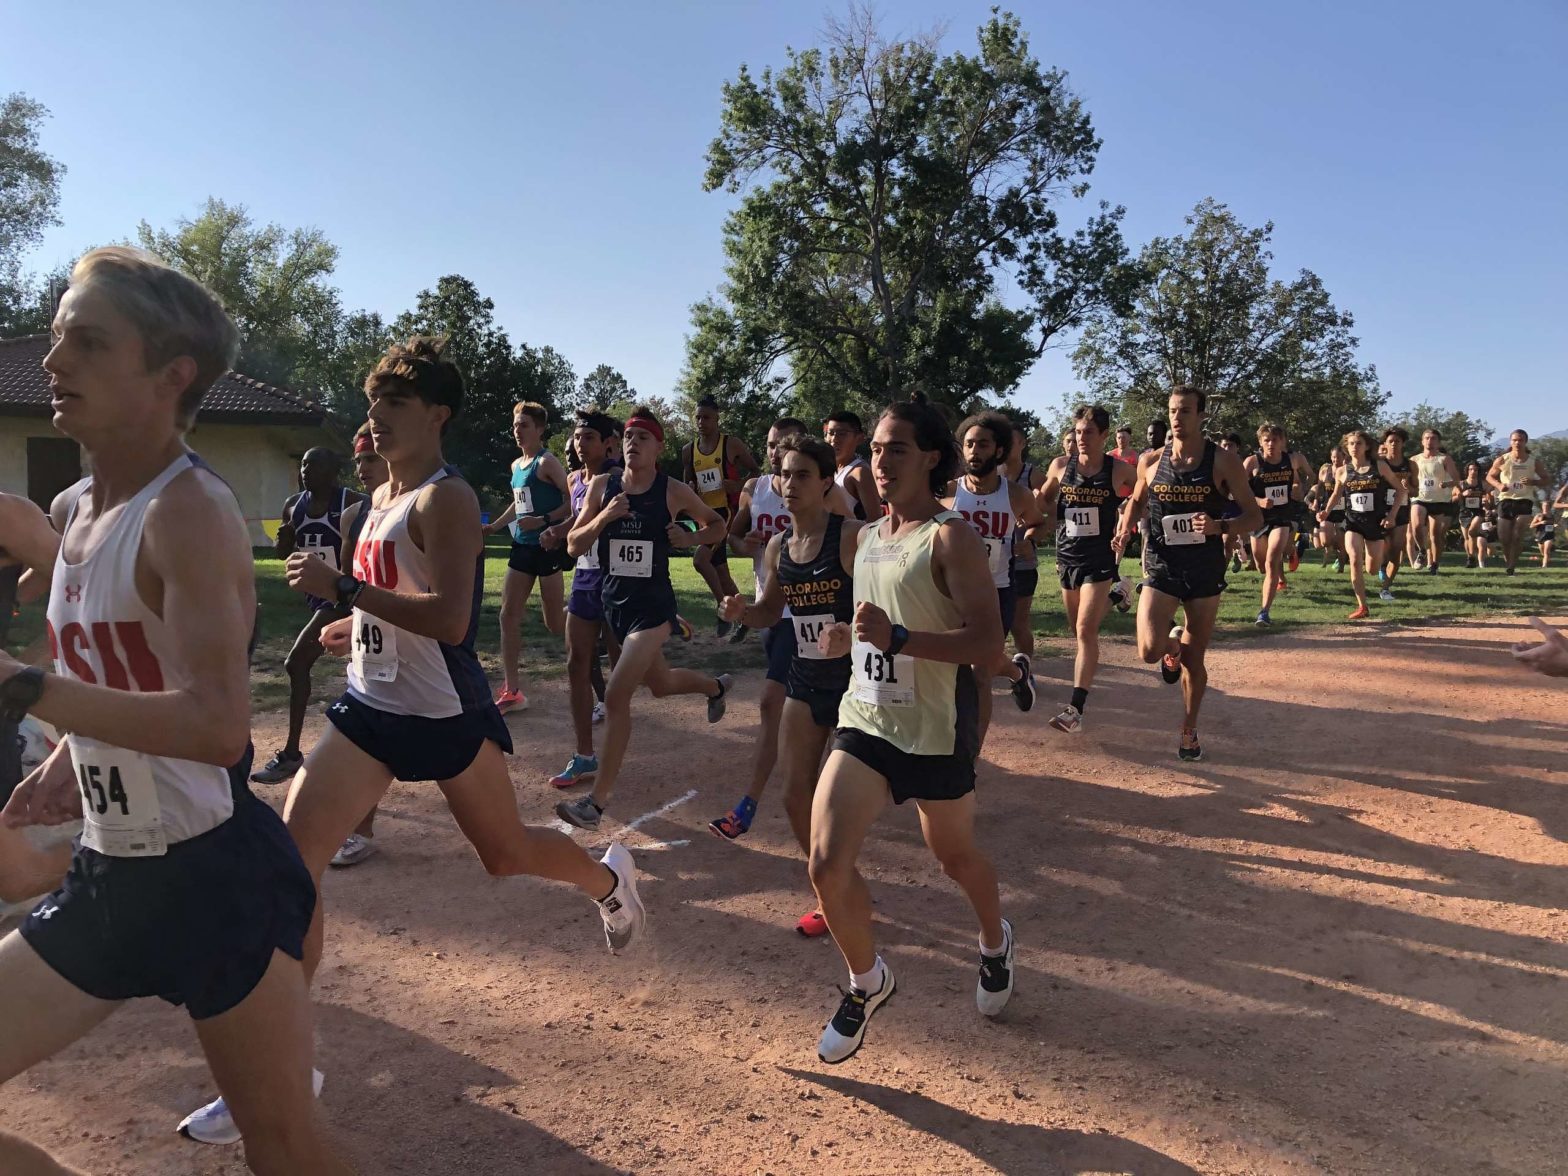 CMC’s top runner Jason Macaluso (yellow singlet) gets off to a fast pace at the start of the Ted Castaneda Cross-Country Classic in Colorado Springs on Sept. 11, 2021.